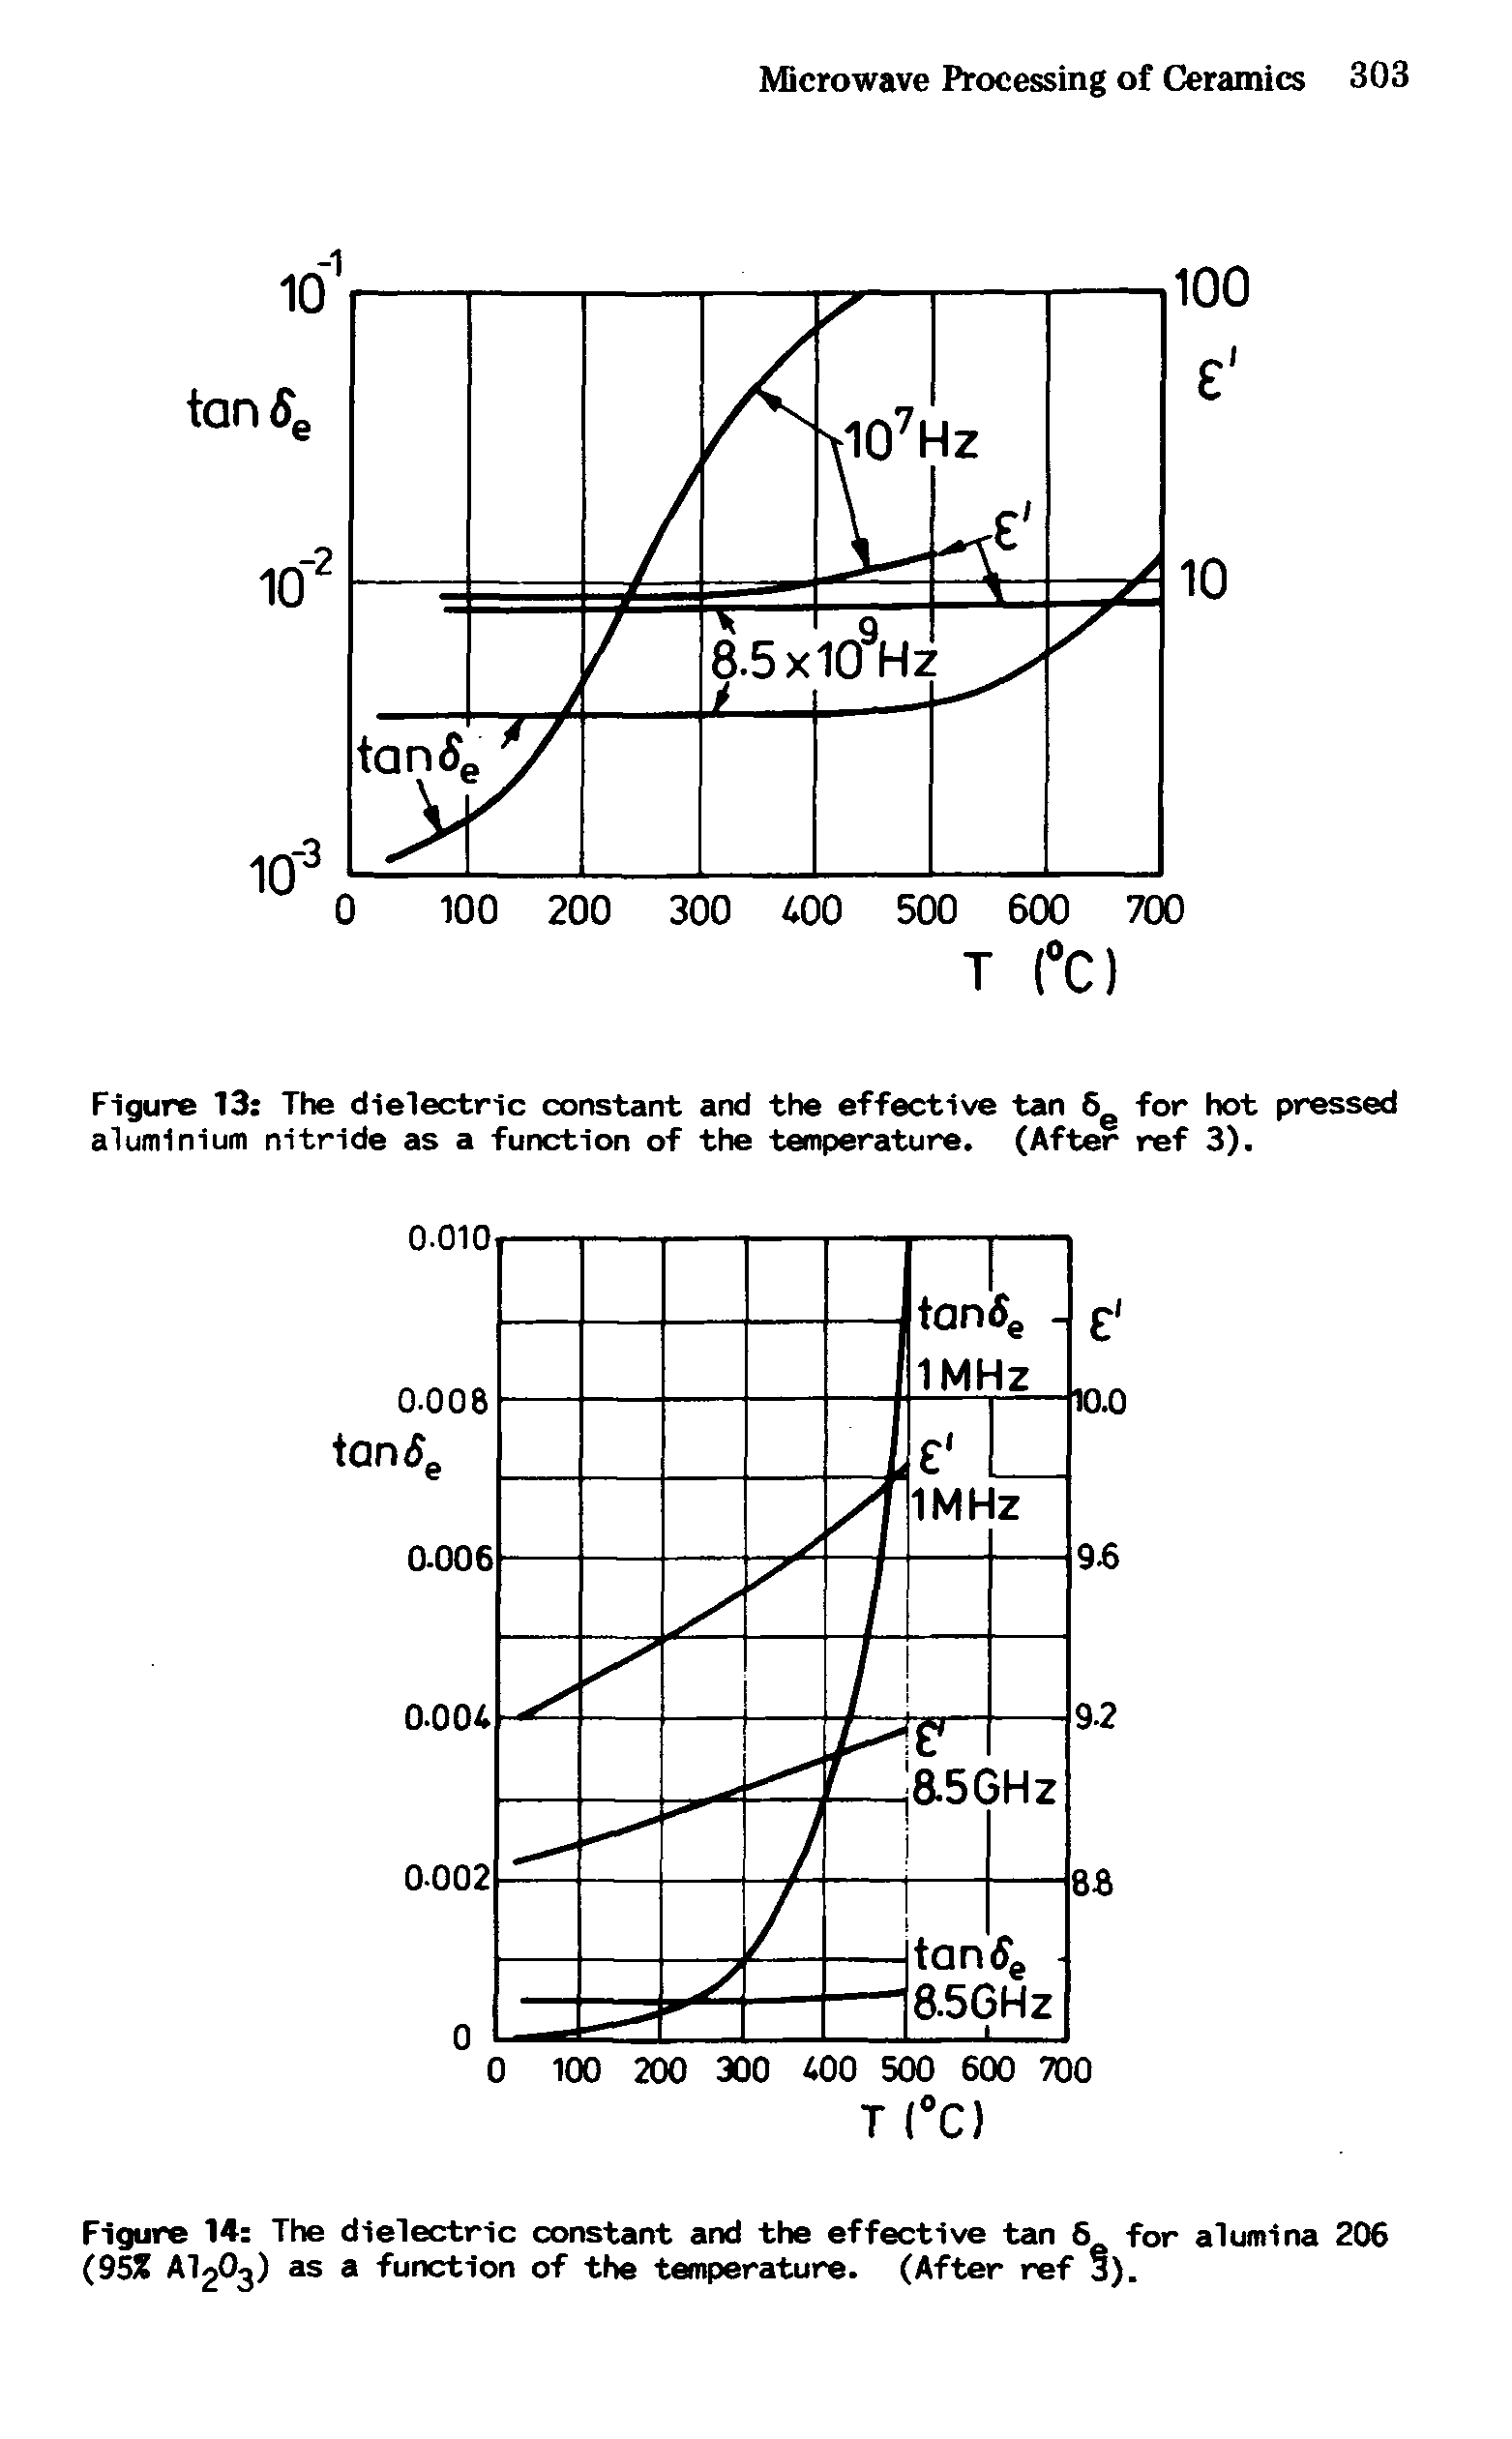 Figure 13 The dielectric constant and the effective tan 6 for hot pressed aluminium nitride as a function of the temperature. (After ref 3).